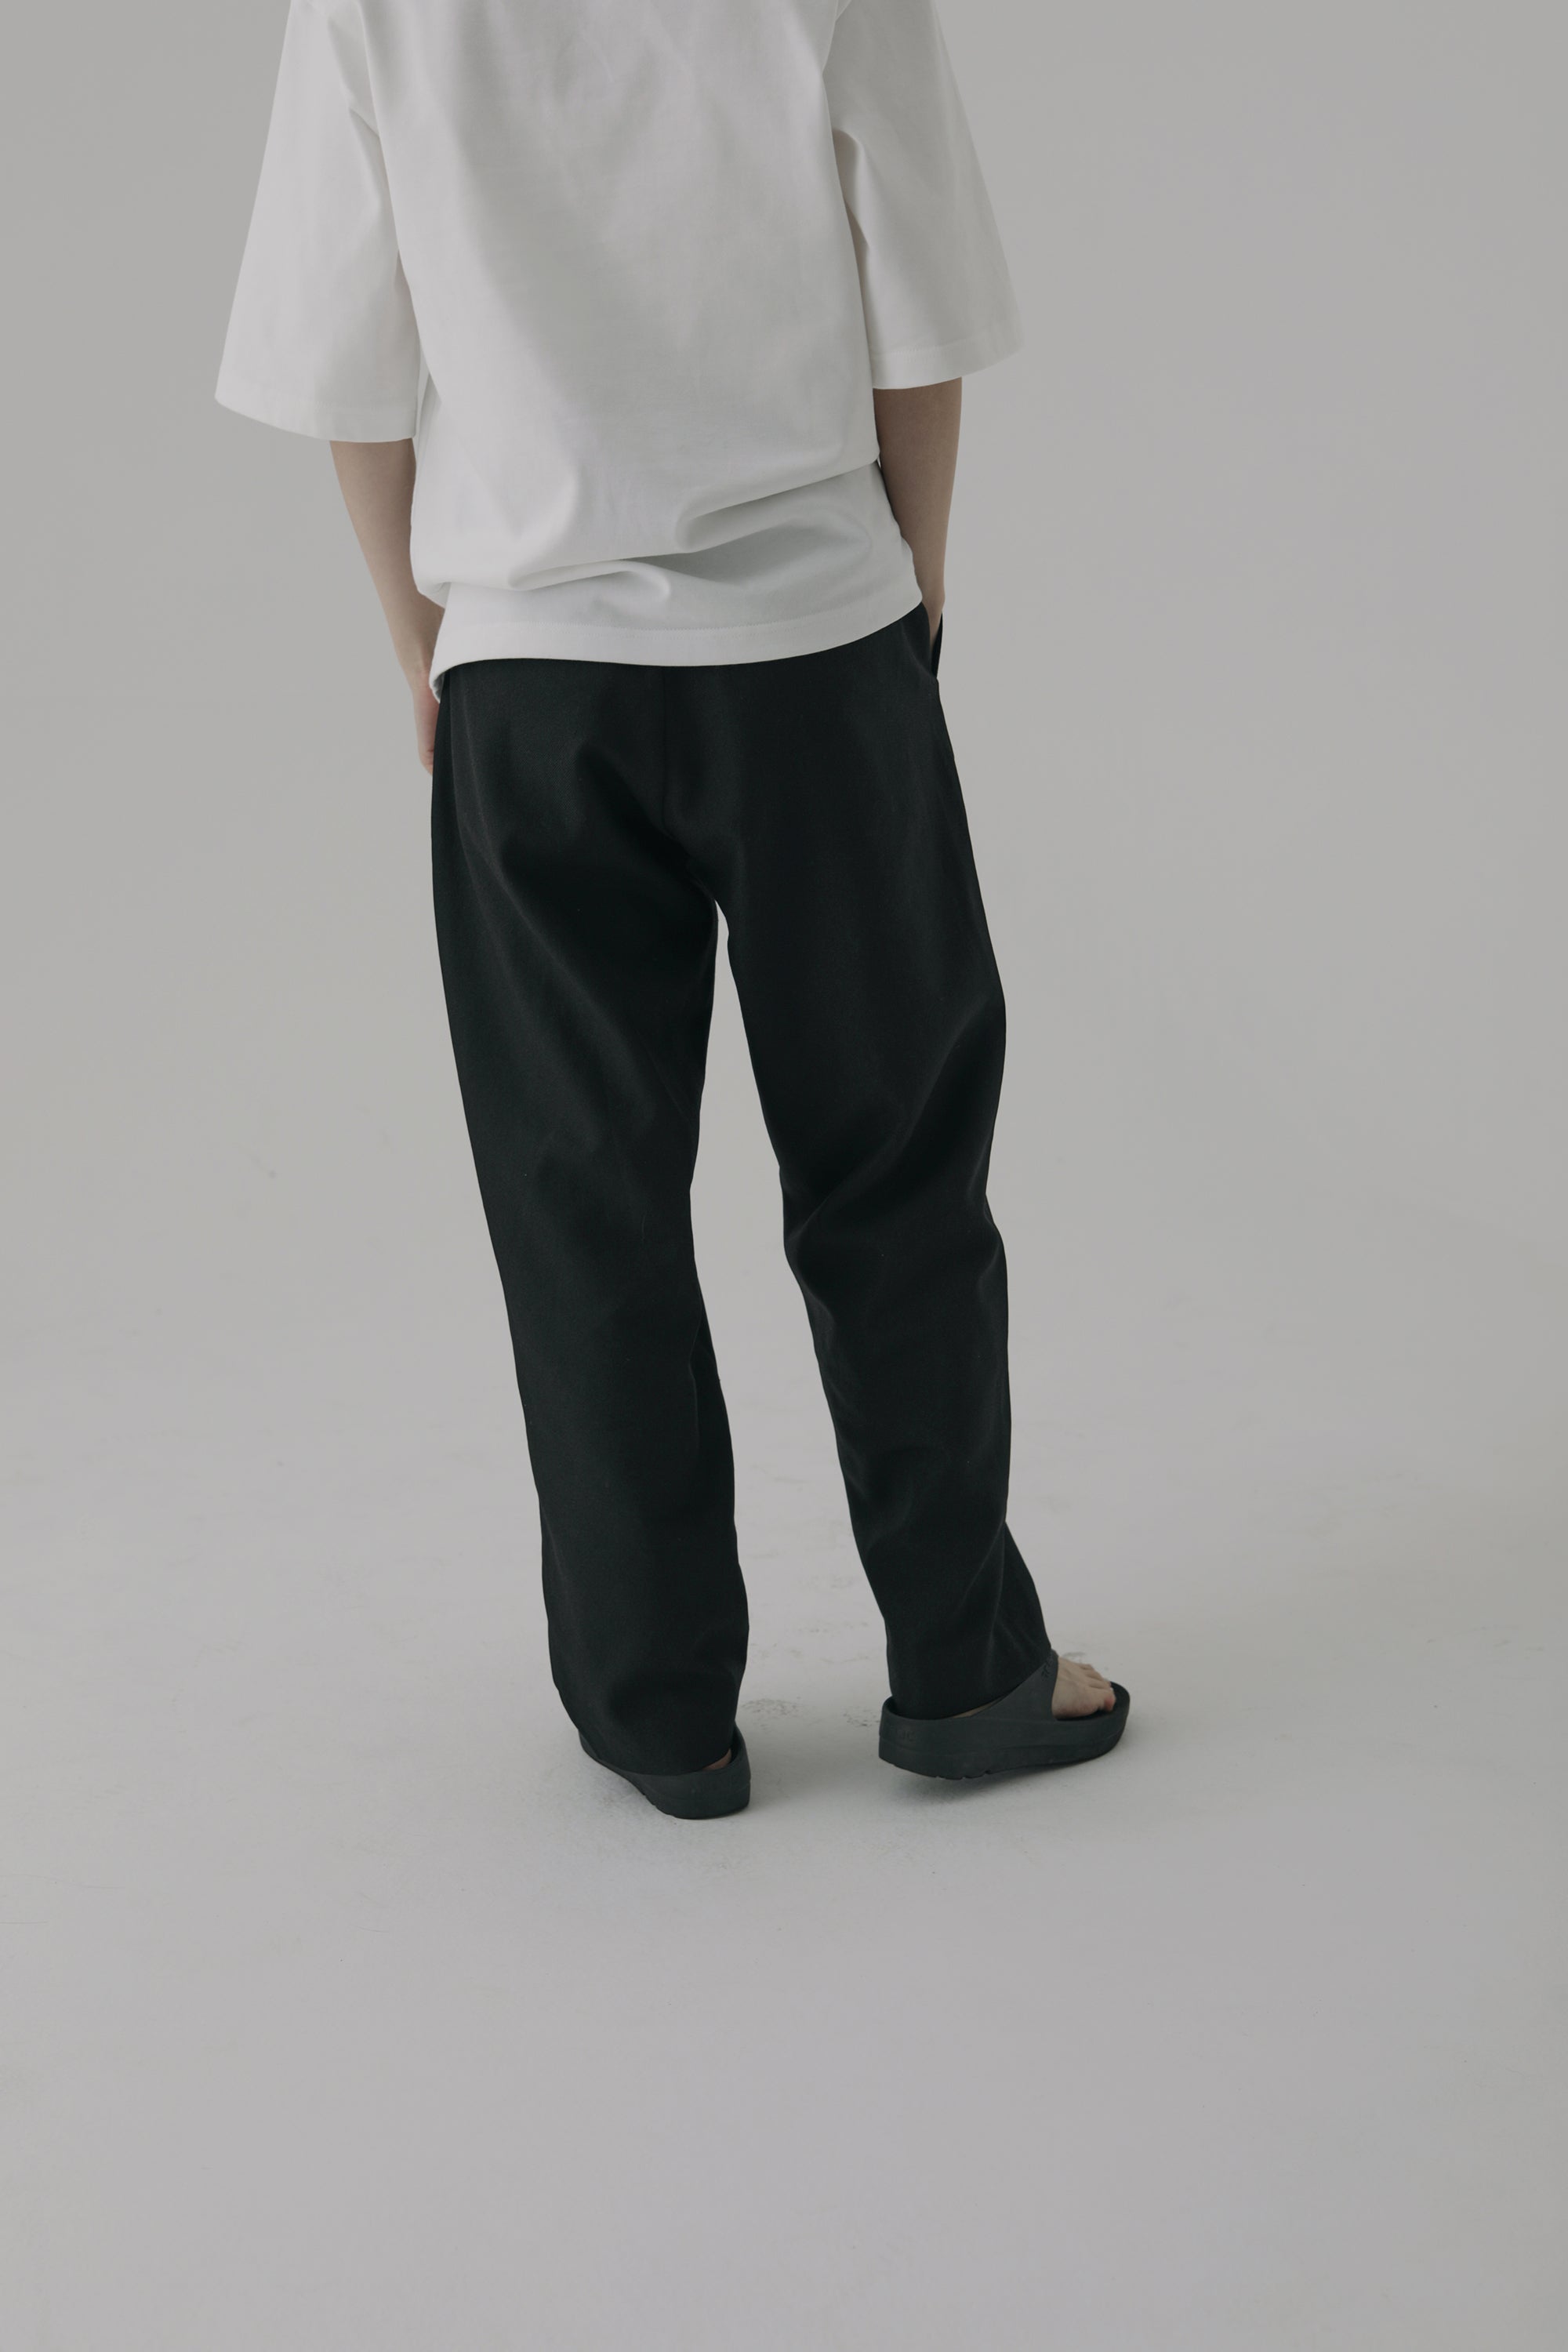 1/f clothing NEUTRAL TAPERED PANTS グリーン | www.agesef.com